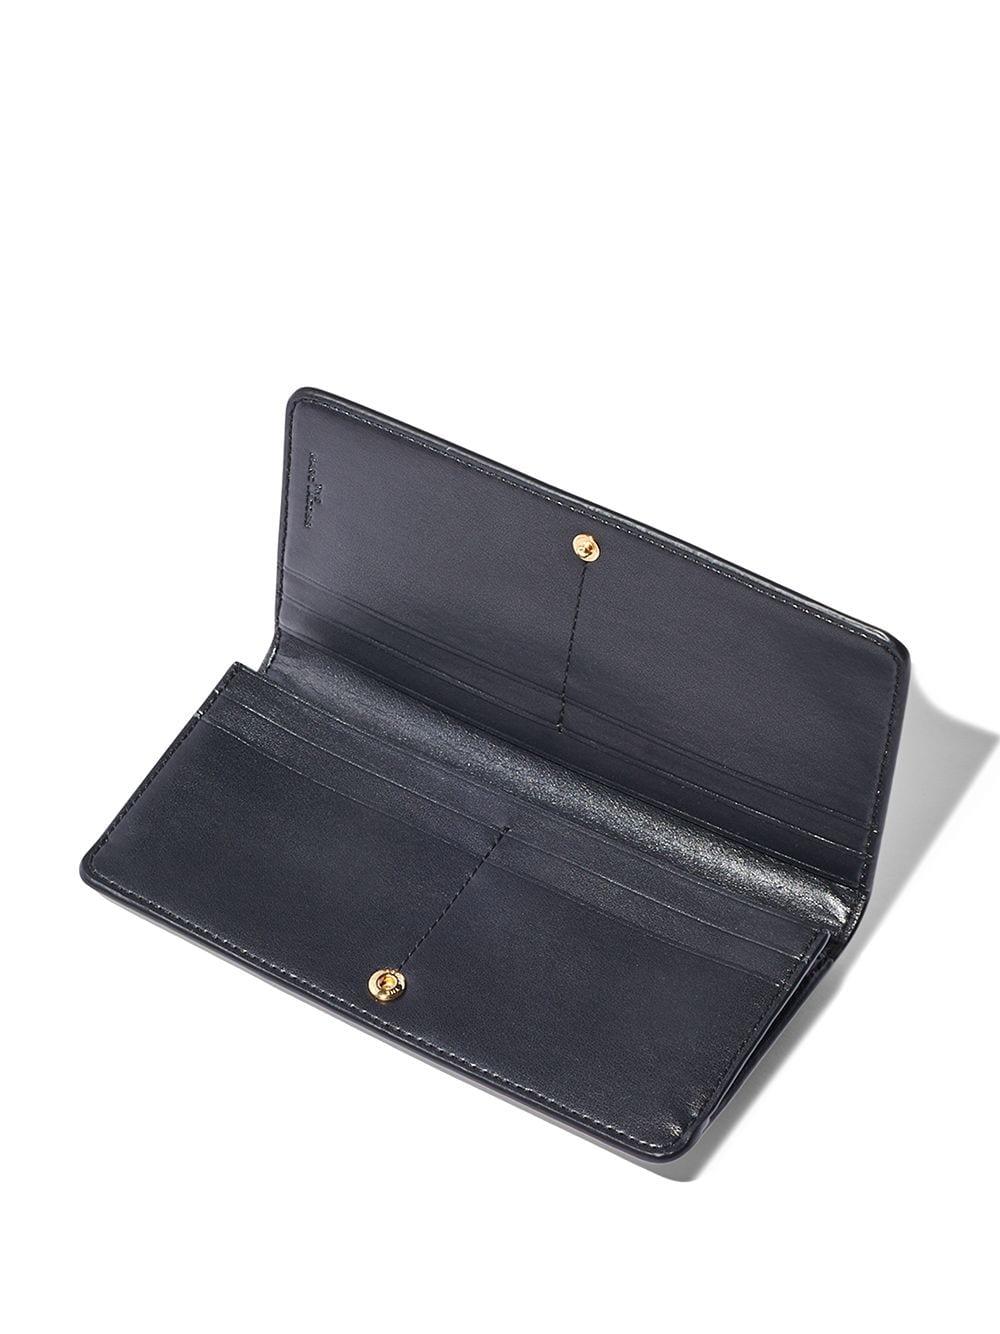 MARC JACOBS Madison Open Face Wallet